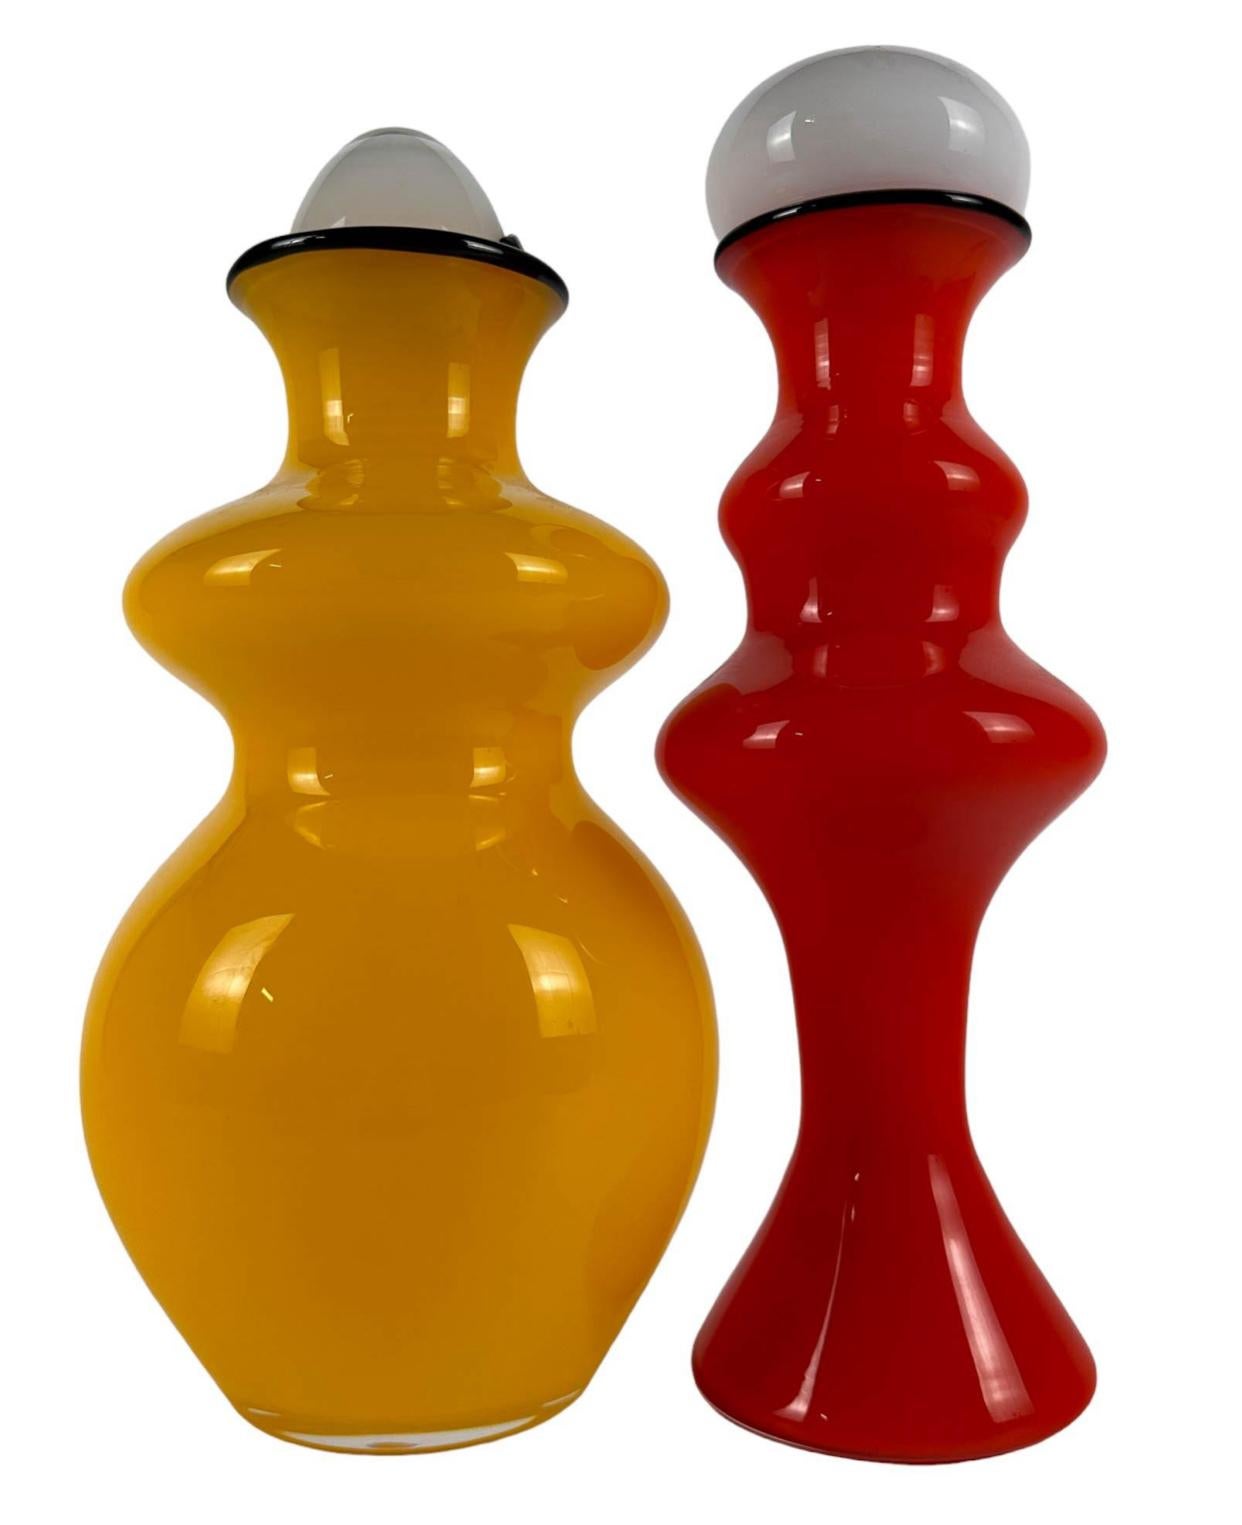 Hand-Crafted Colorful Four Piece Art Glass Decanter Collection by Strombergshyttan Studio For Sale